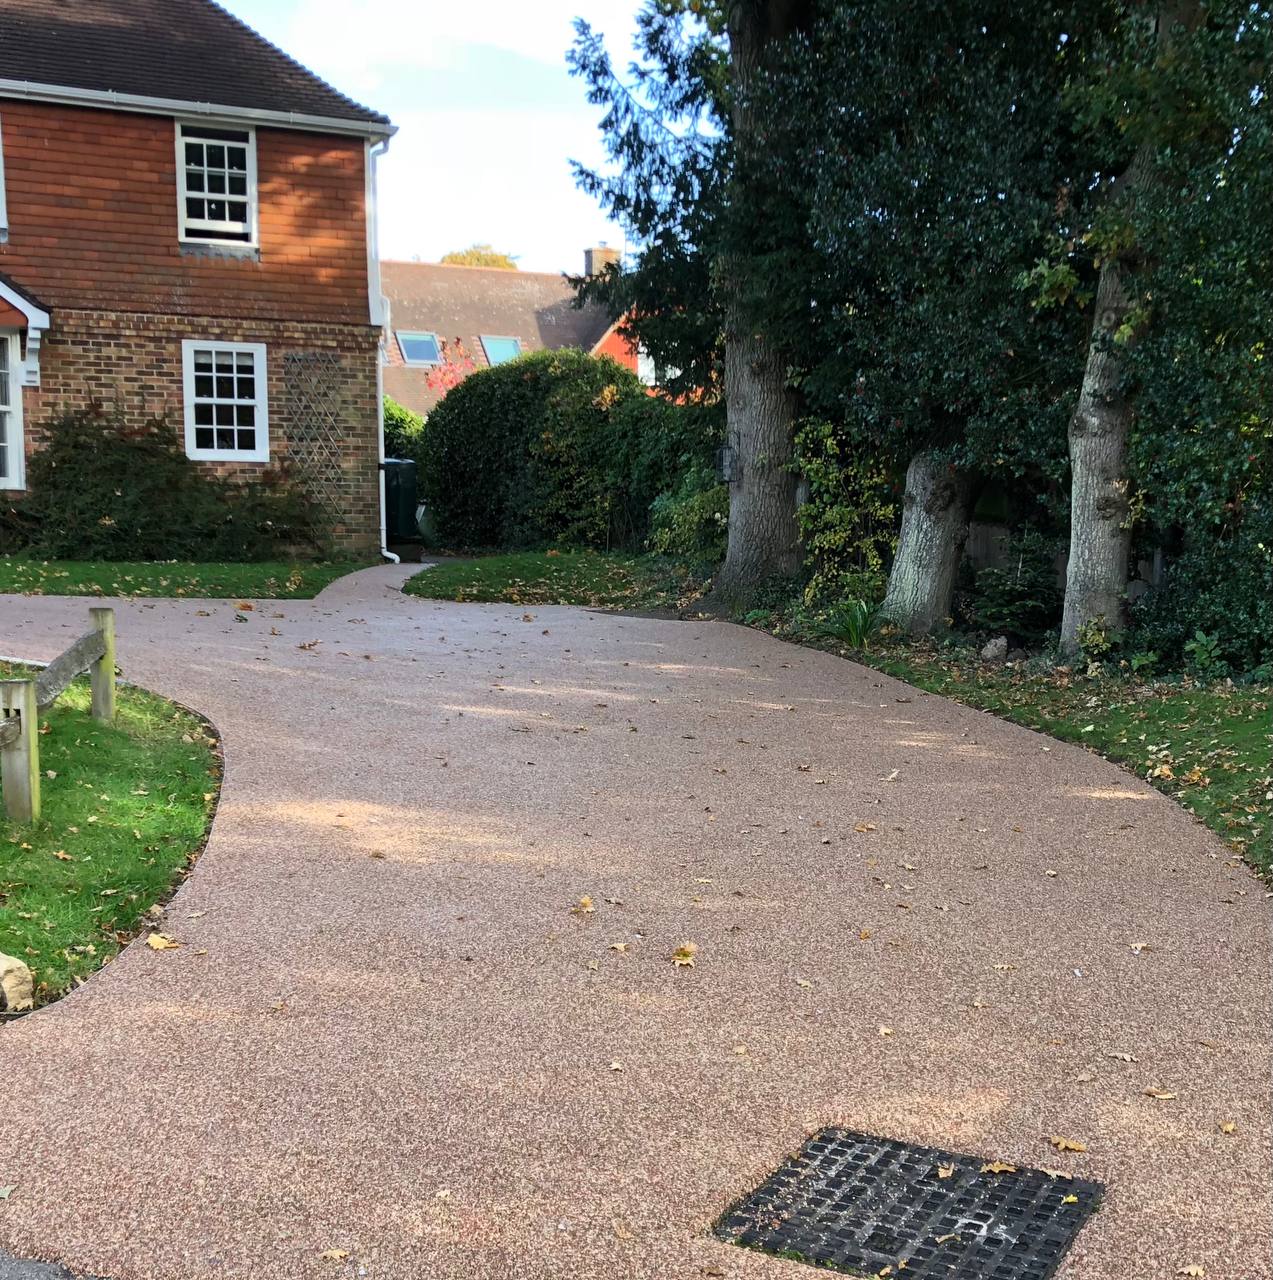 This is a photo of a Resin bound driveway carried out in a district of York. All works done by Resin Driveways York